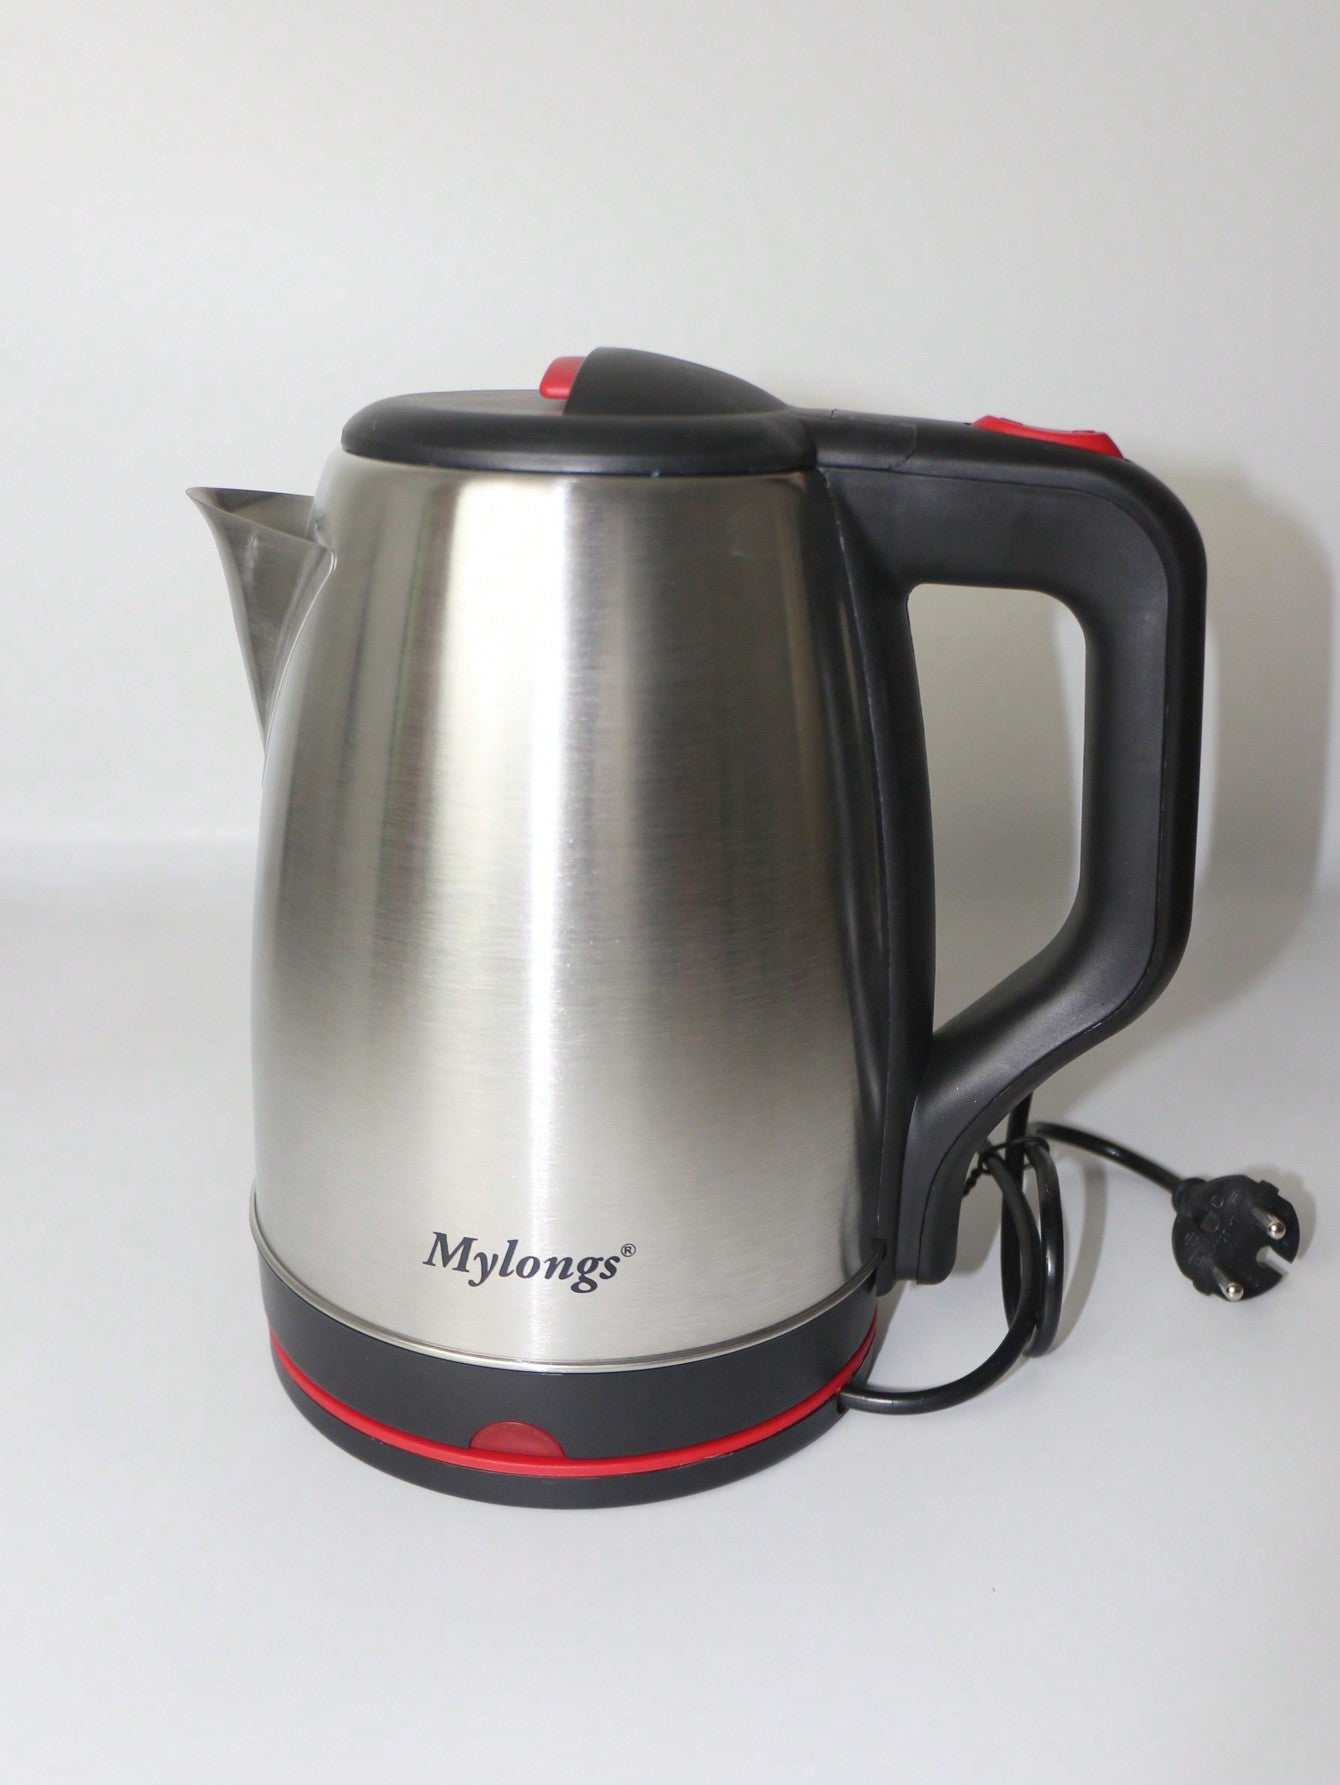 1 Electric Kettle, Fully Automatic Constant Temperature Stainless Steel Kettle 2.0l, 2000 Watts With Led Display, Overheating Protection, Automatic Power Off, 220-240v Large Capacity Health Kettle-Silver-1